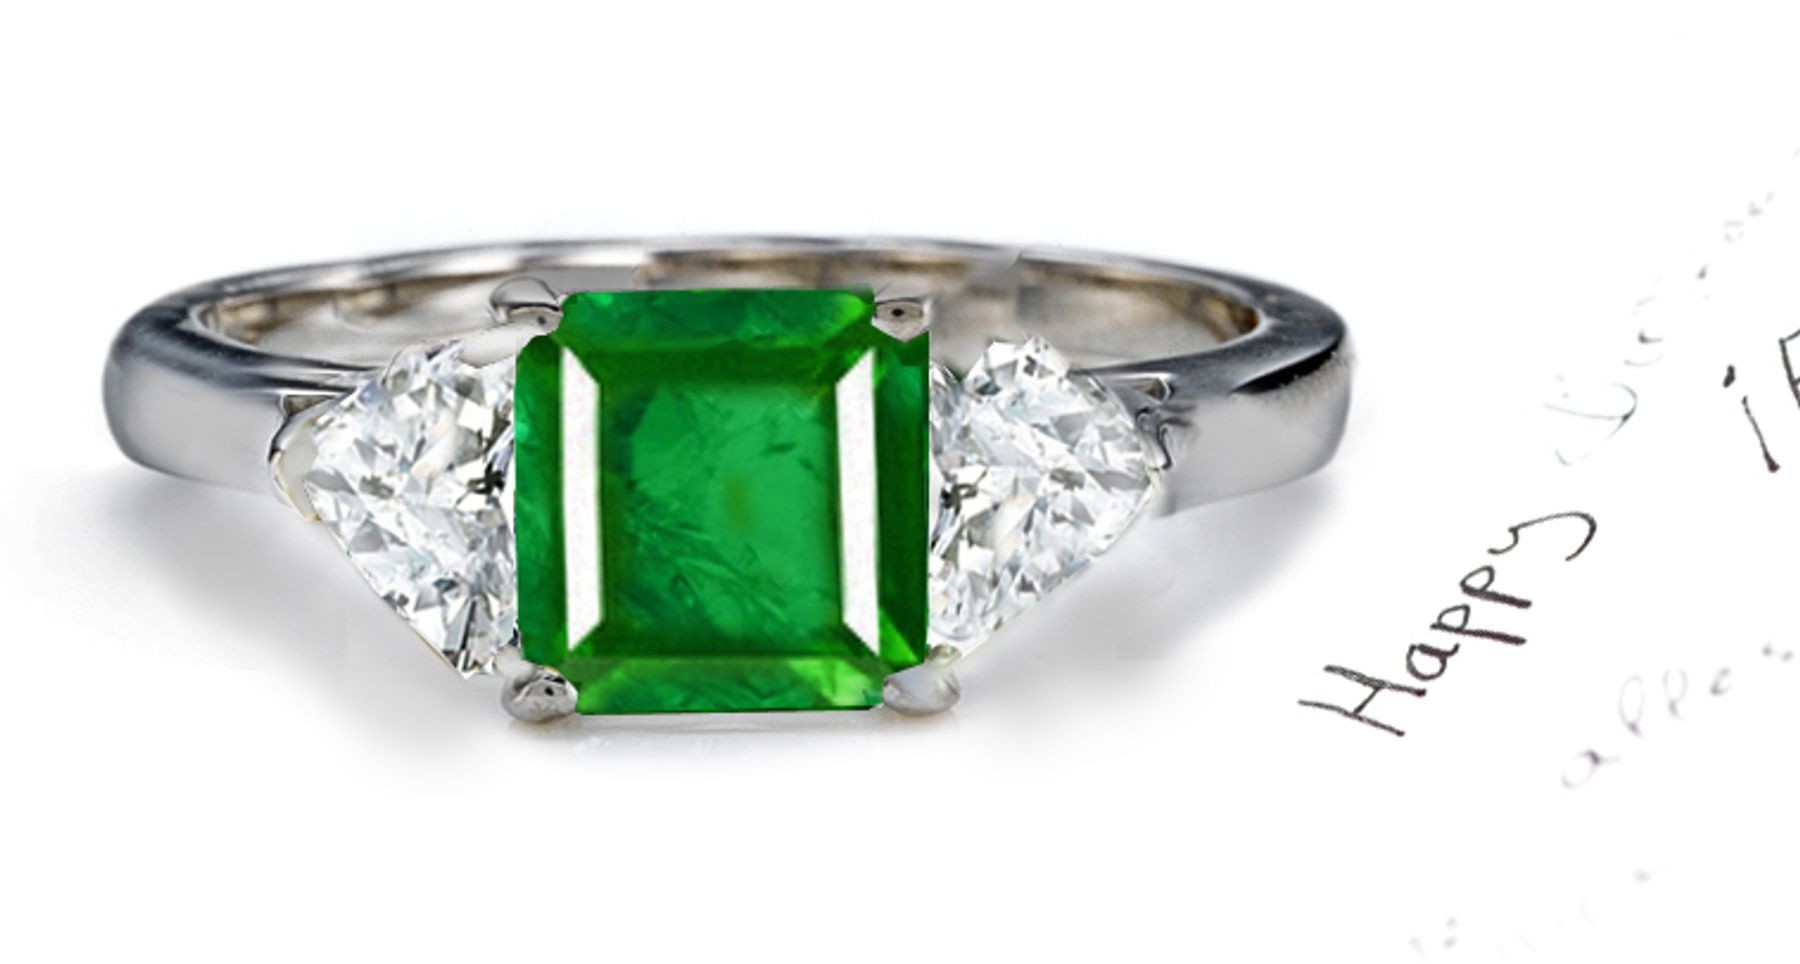 Three Stone Half Hoop Rings: Special 3 Stone 2 Matched Side Stone Princess Cut Emerald & Heart Diamond Hoop Ring